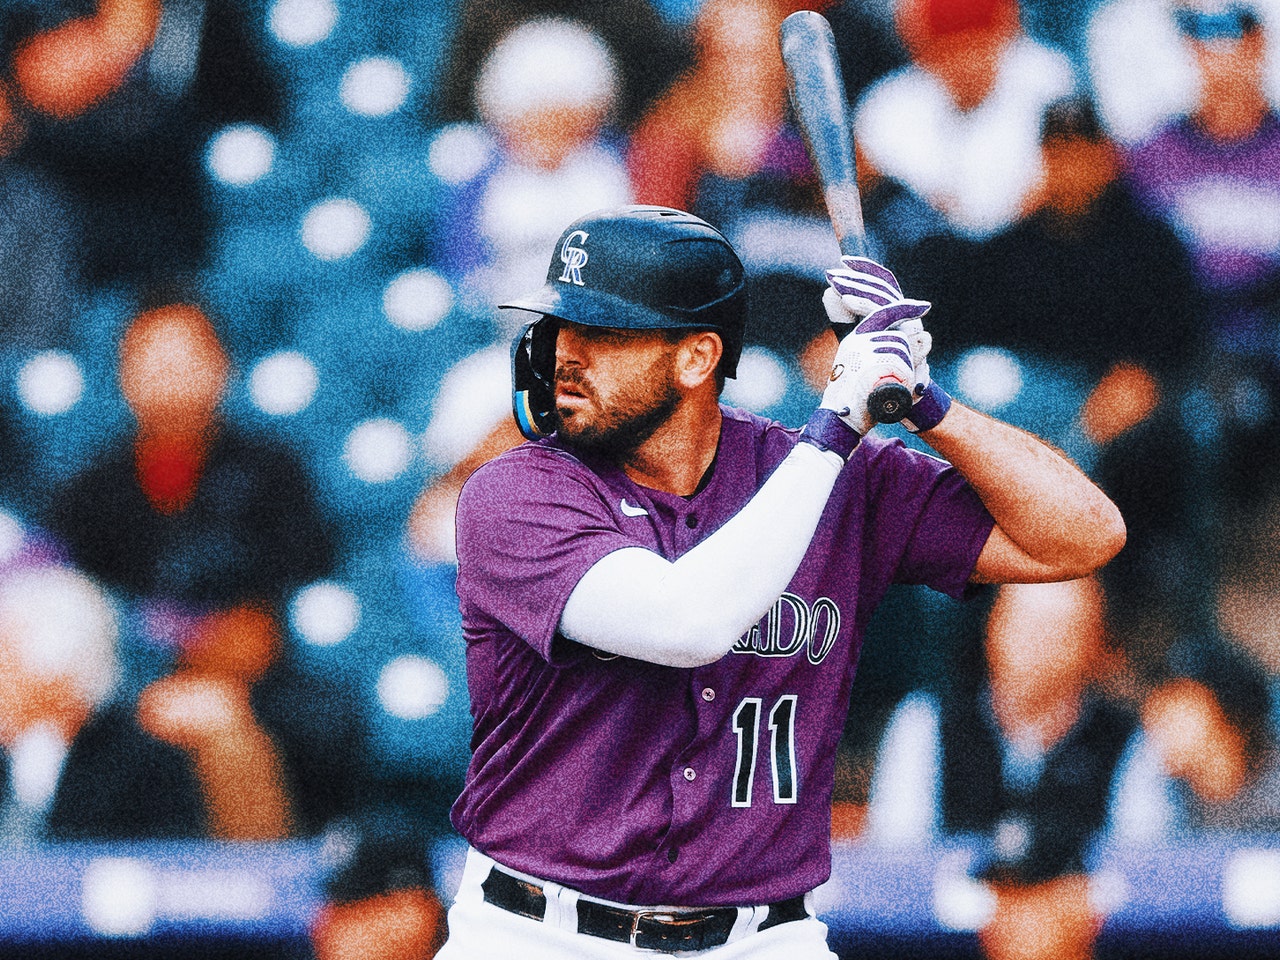 After blowout win in Denver, Angels acquire Mike Moustakas from Rockies